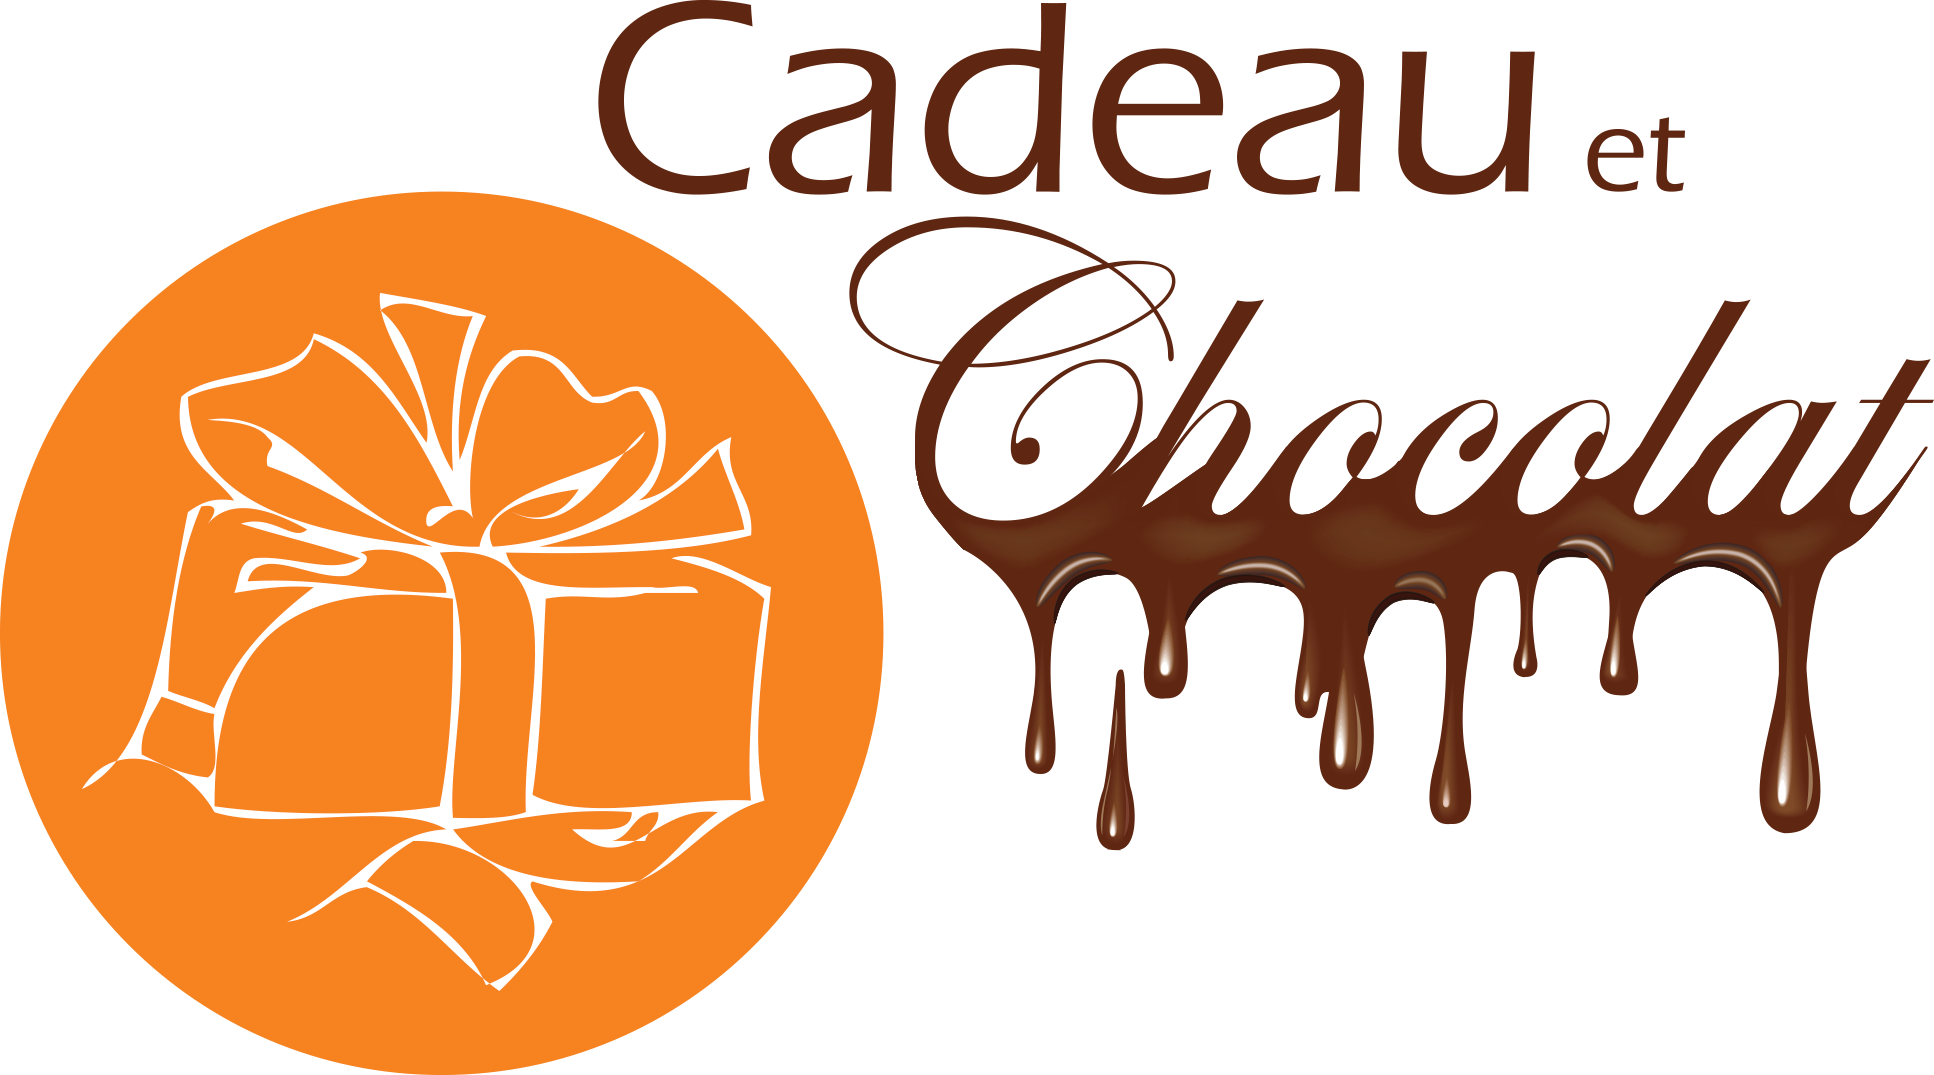 You are currently viewing CADEAU ET CHOCOLAT